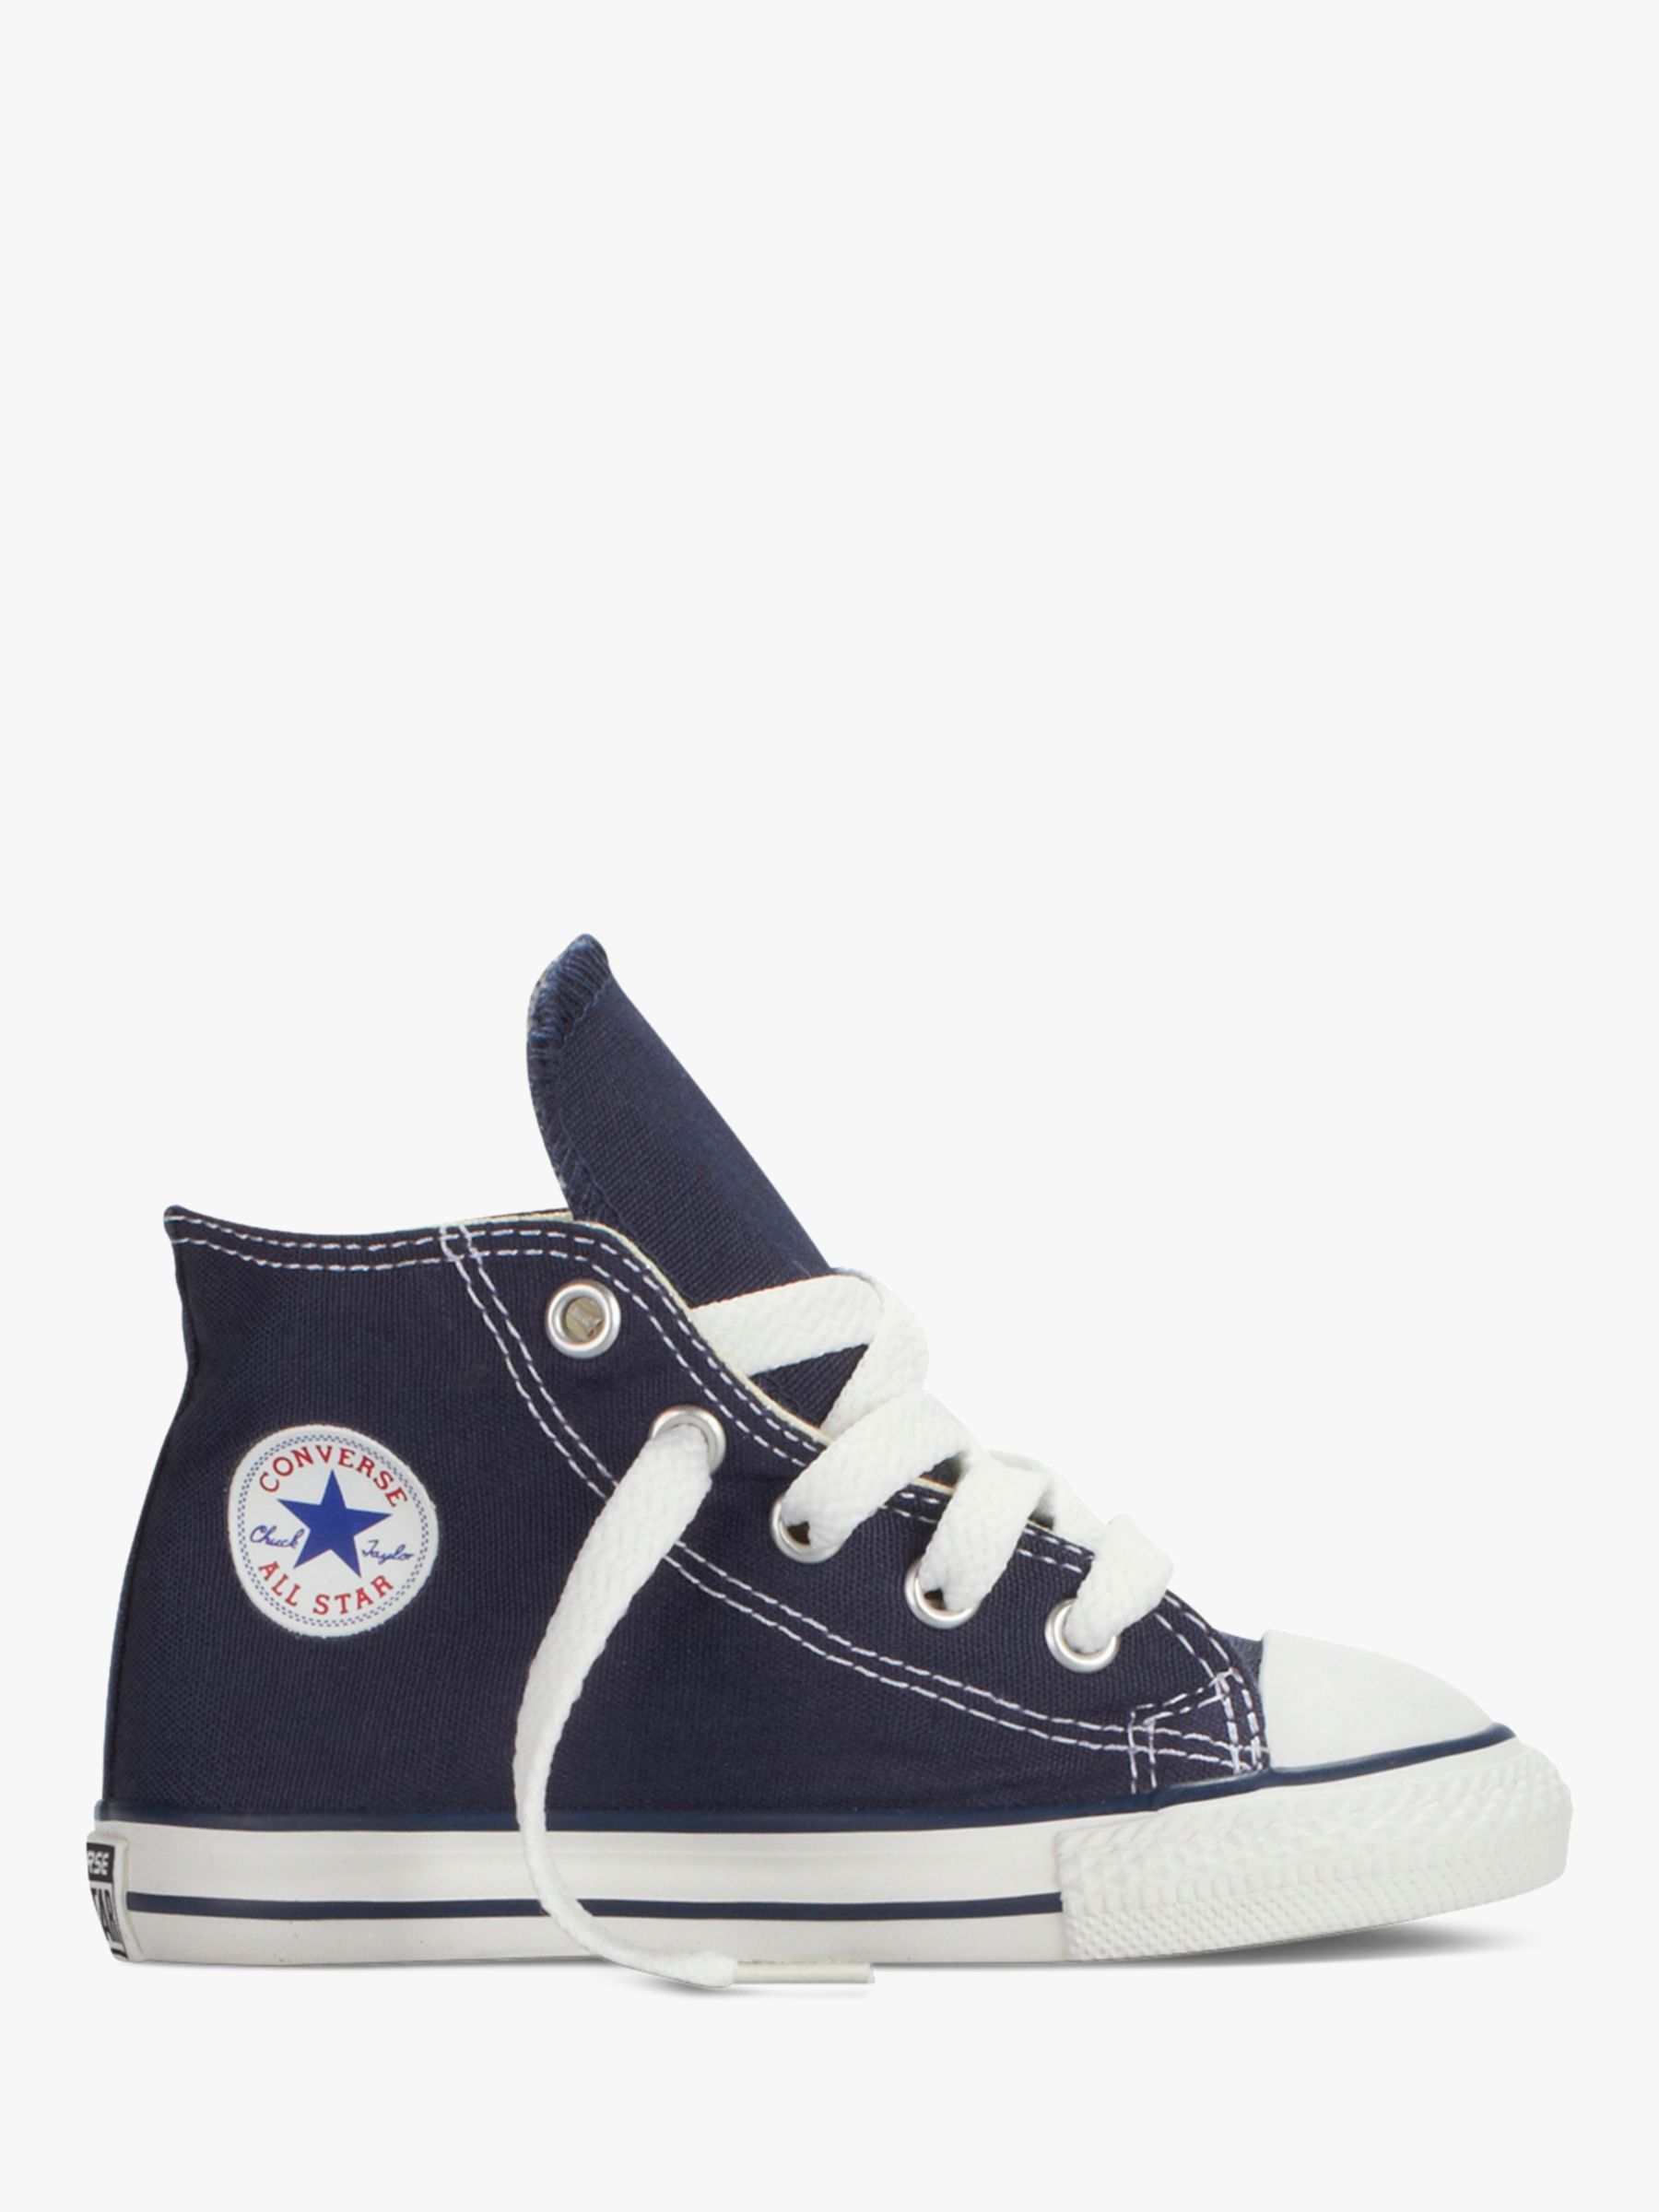 All Star Core-Hi Trainers, Navy, Size 10 Junior